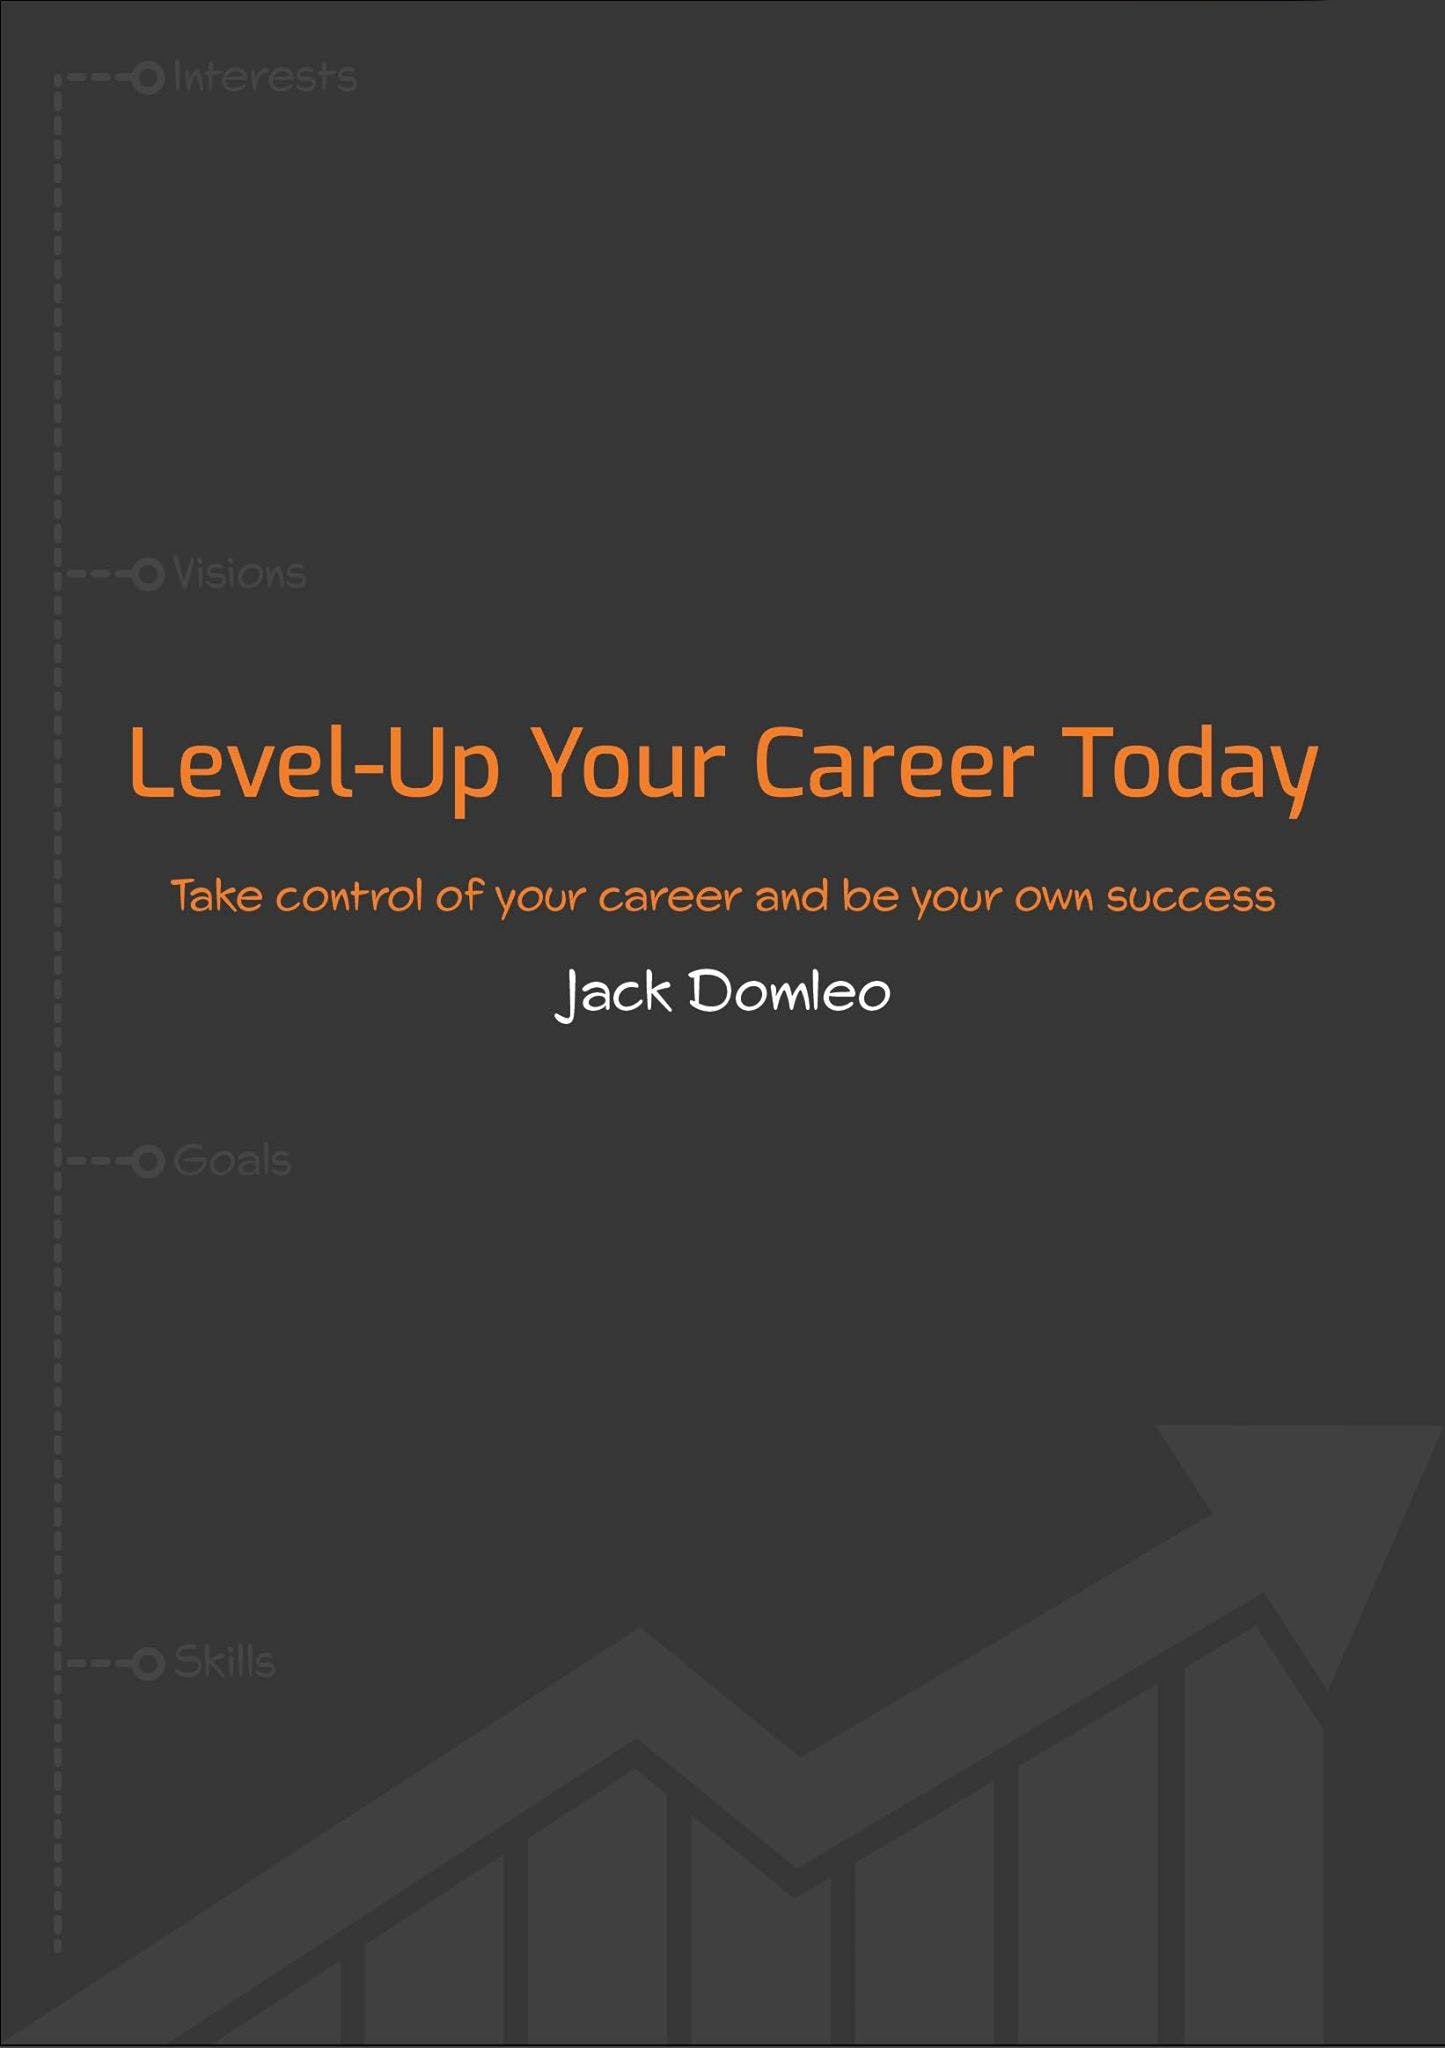 Level-Up Your Career Today: Dev Edition media 3